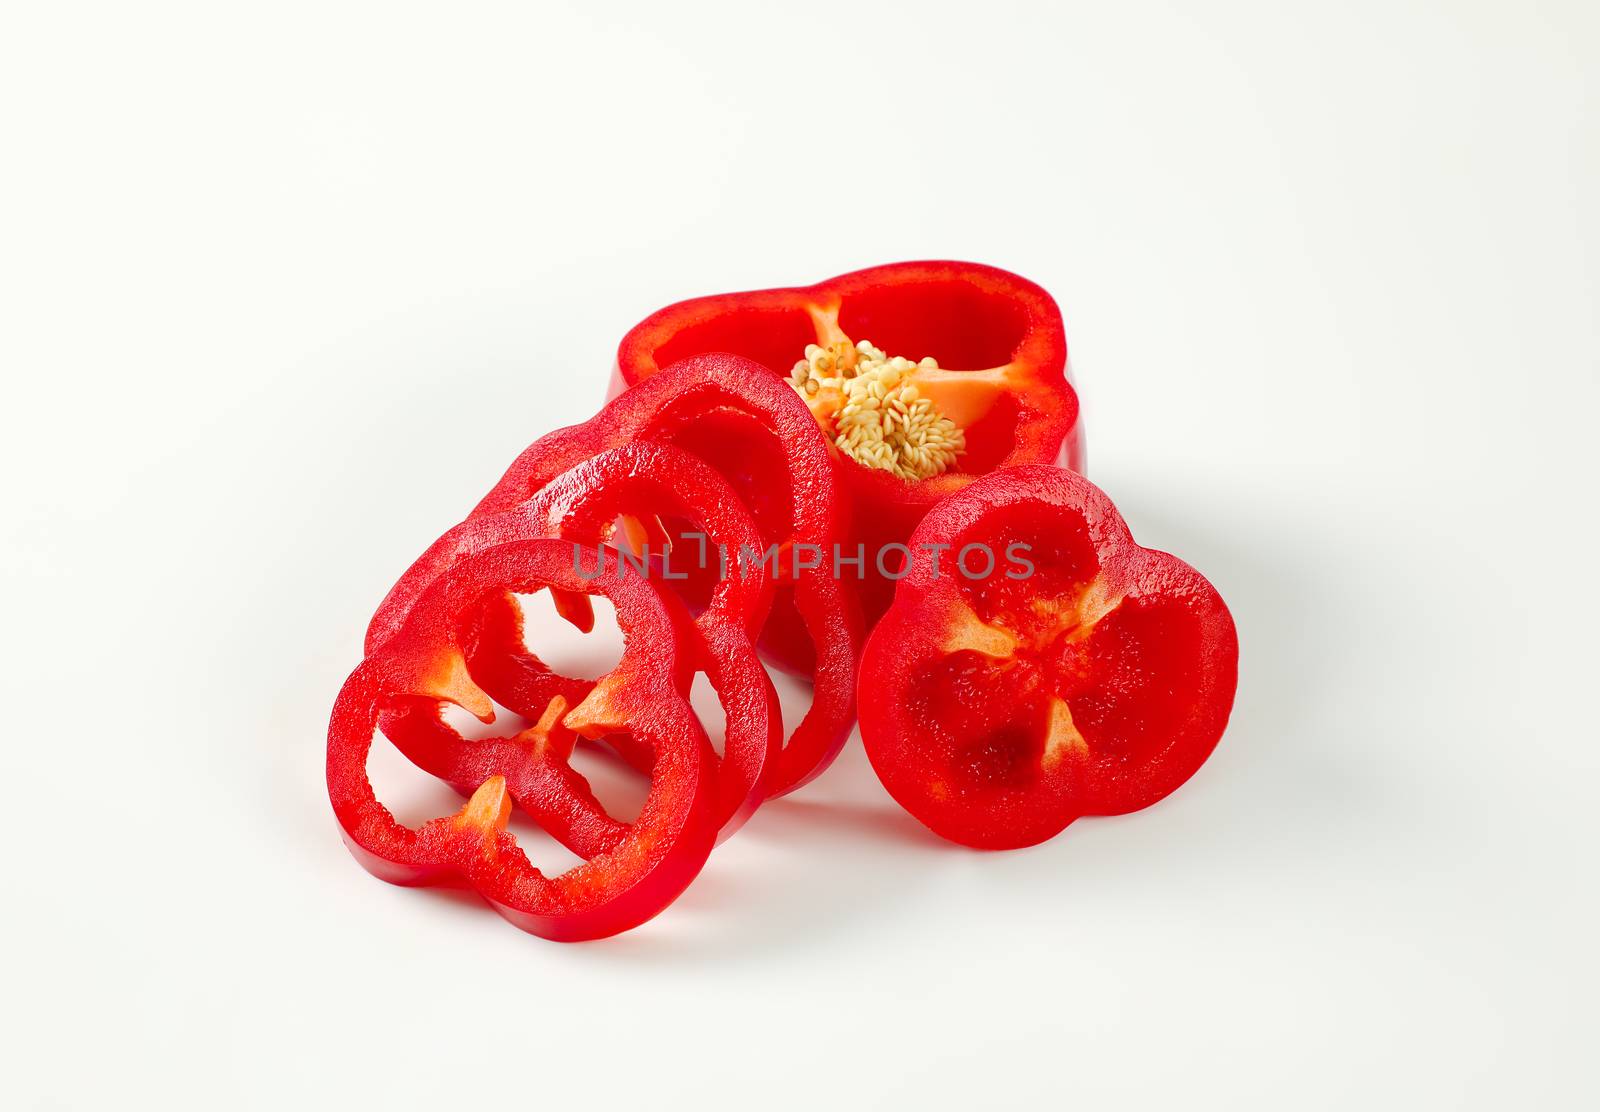 Sliced red bell pepper by Digifoodstock